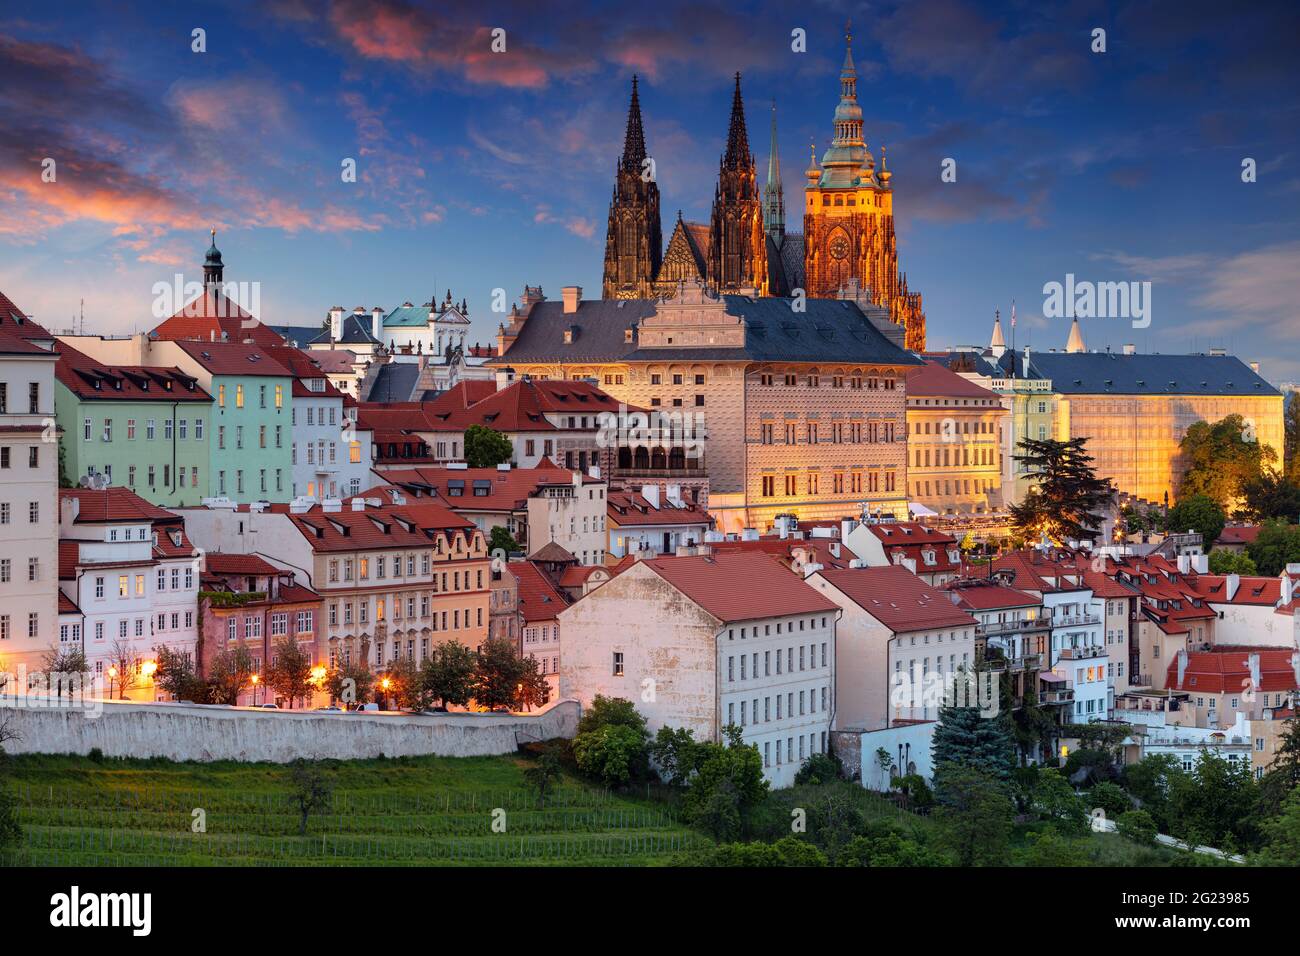 Prague. Aerial cityscape image of Prague, capital city of  Czech Republic with St. Vitus Cathedral at twilight blue hour. Stock Photo